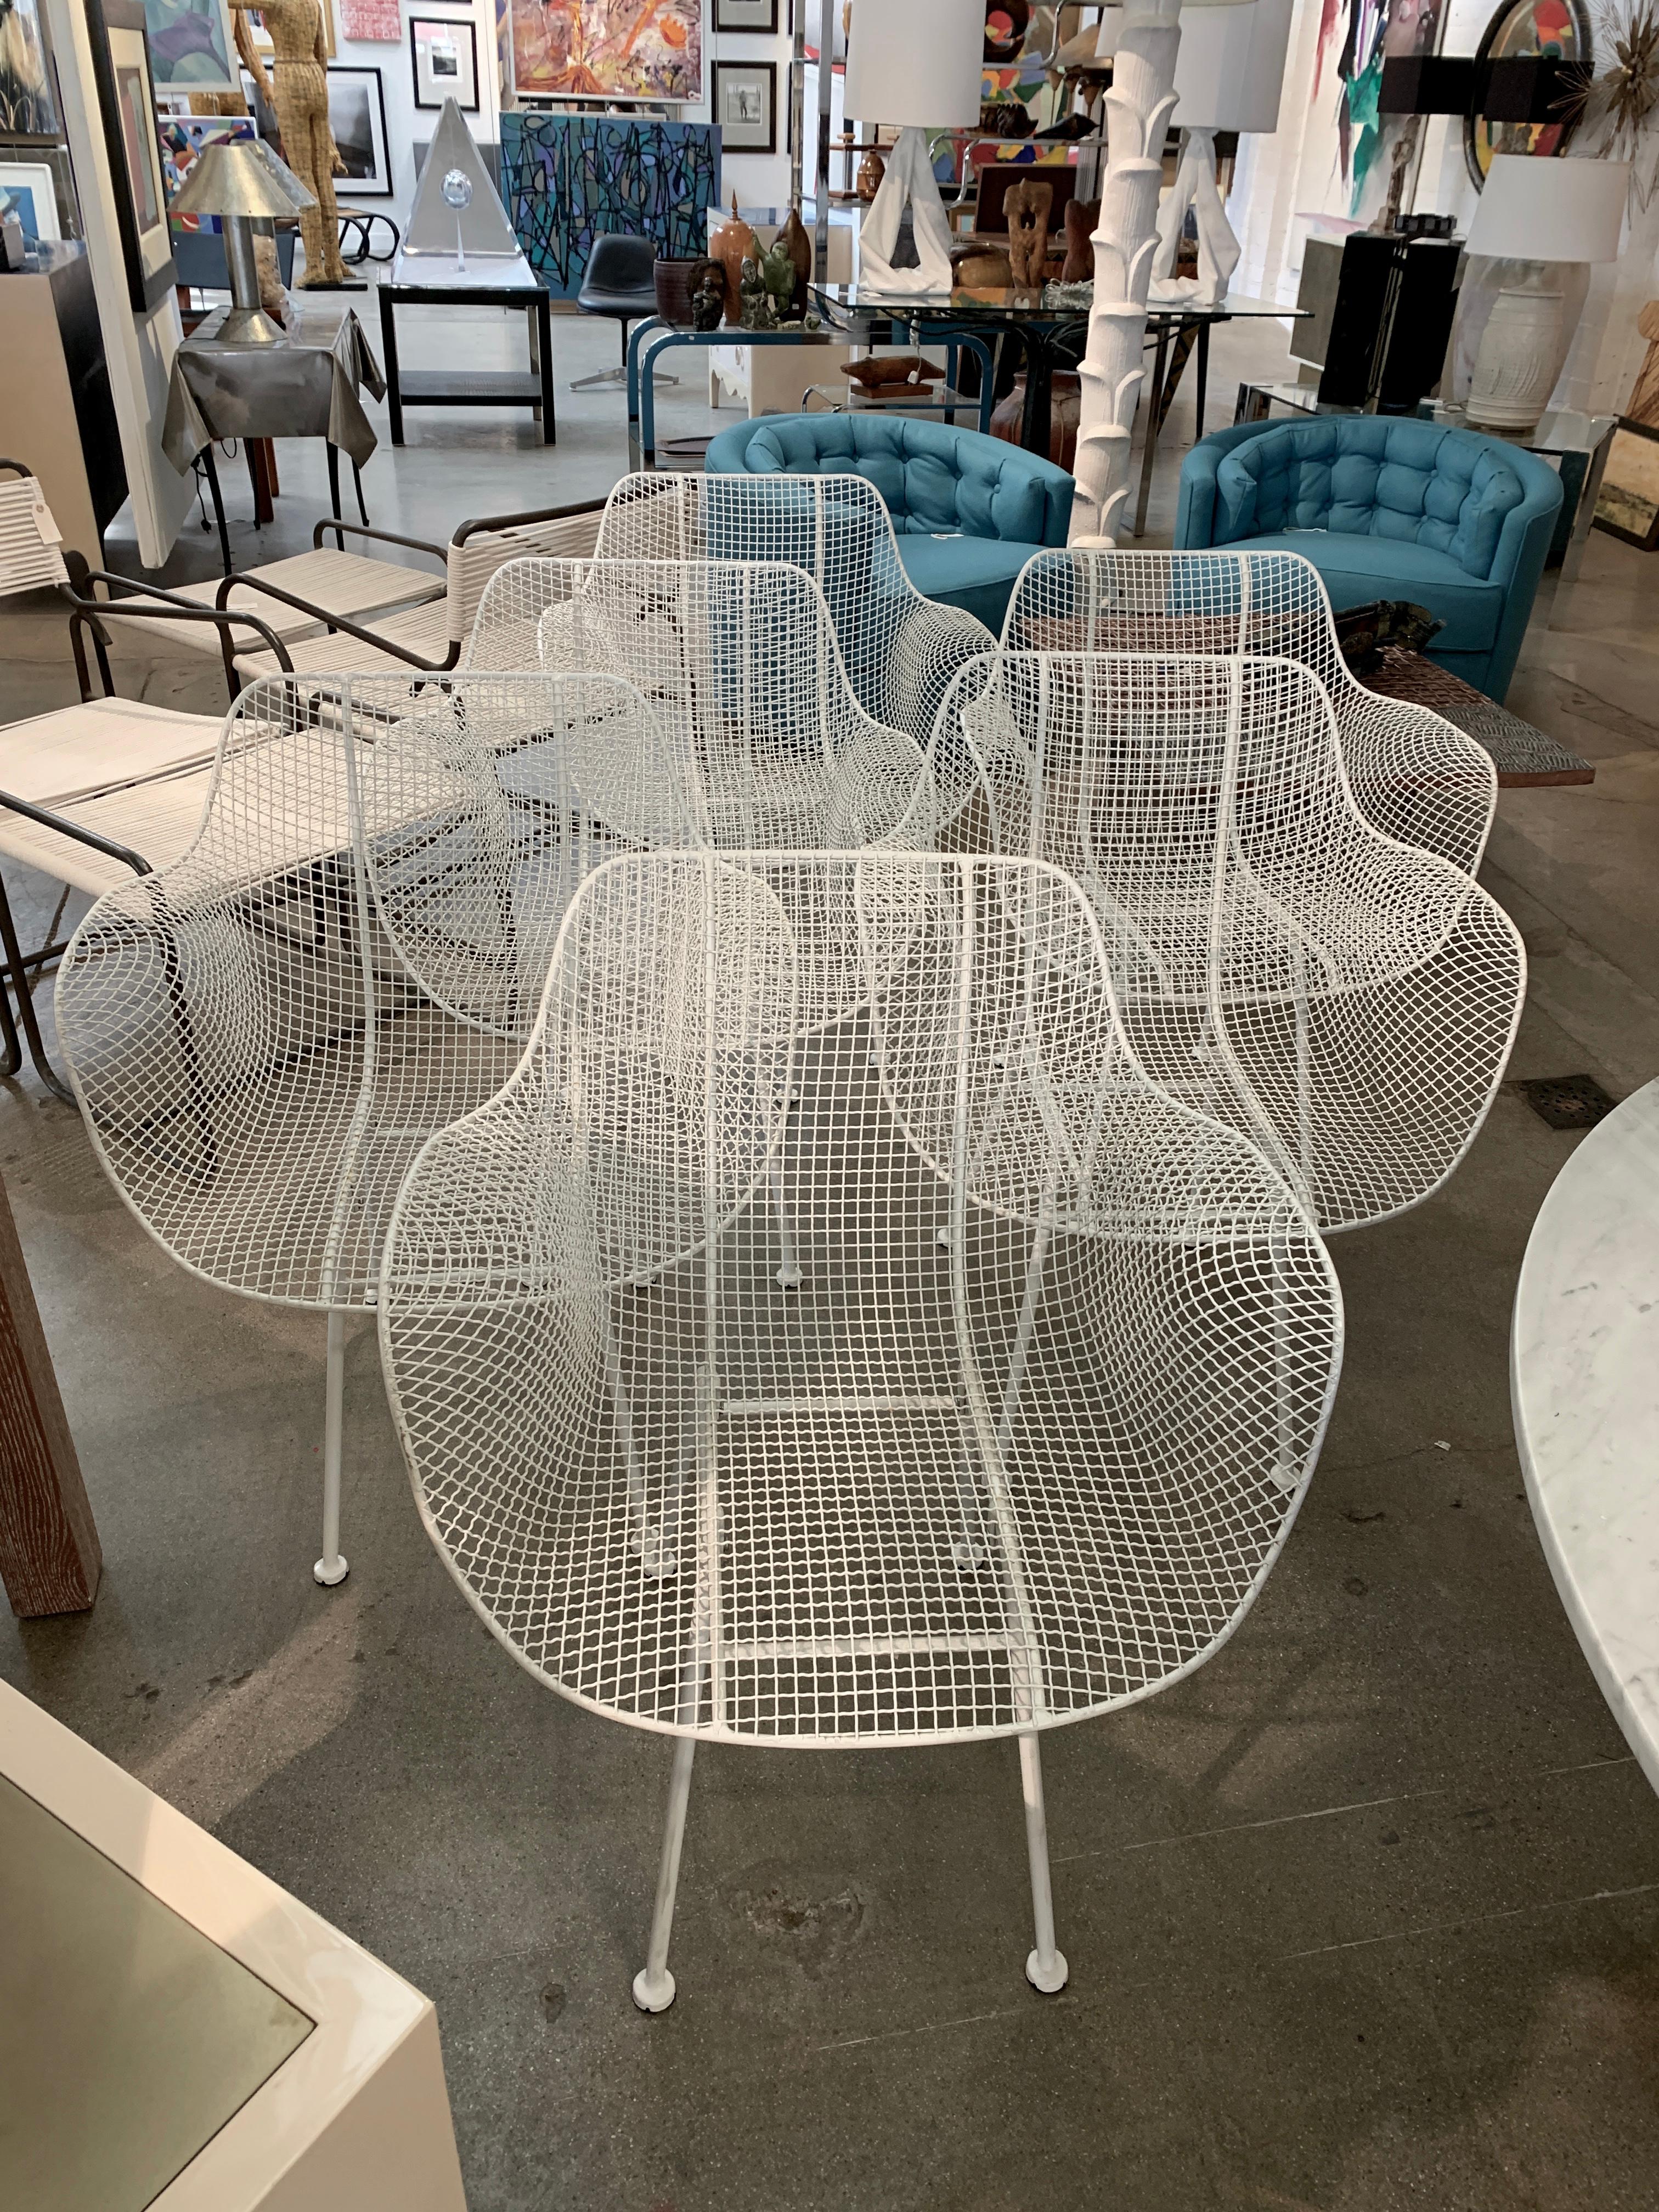 A set of six Woodard Sculptura occasional chairs in powder coated white iron. These are Classic Sculptura chairs that can be used for dining or lounge. Seat height is approx 16-17 inches depending on the area measured. There are some minor areas of